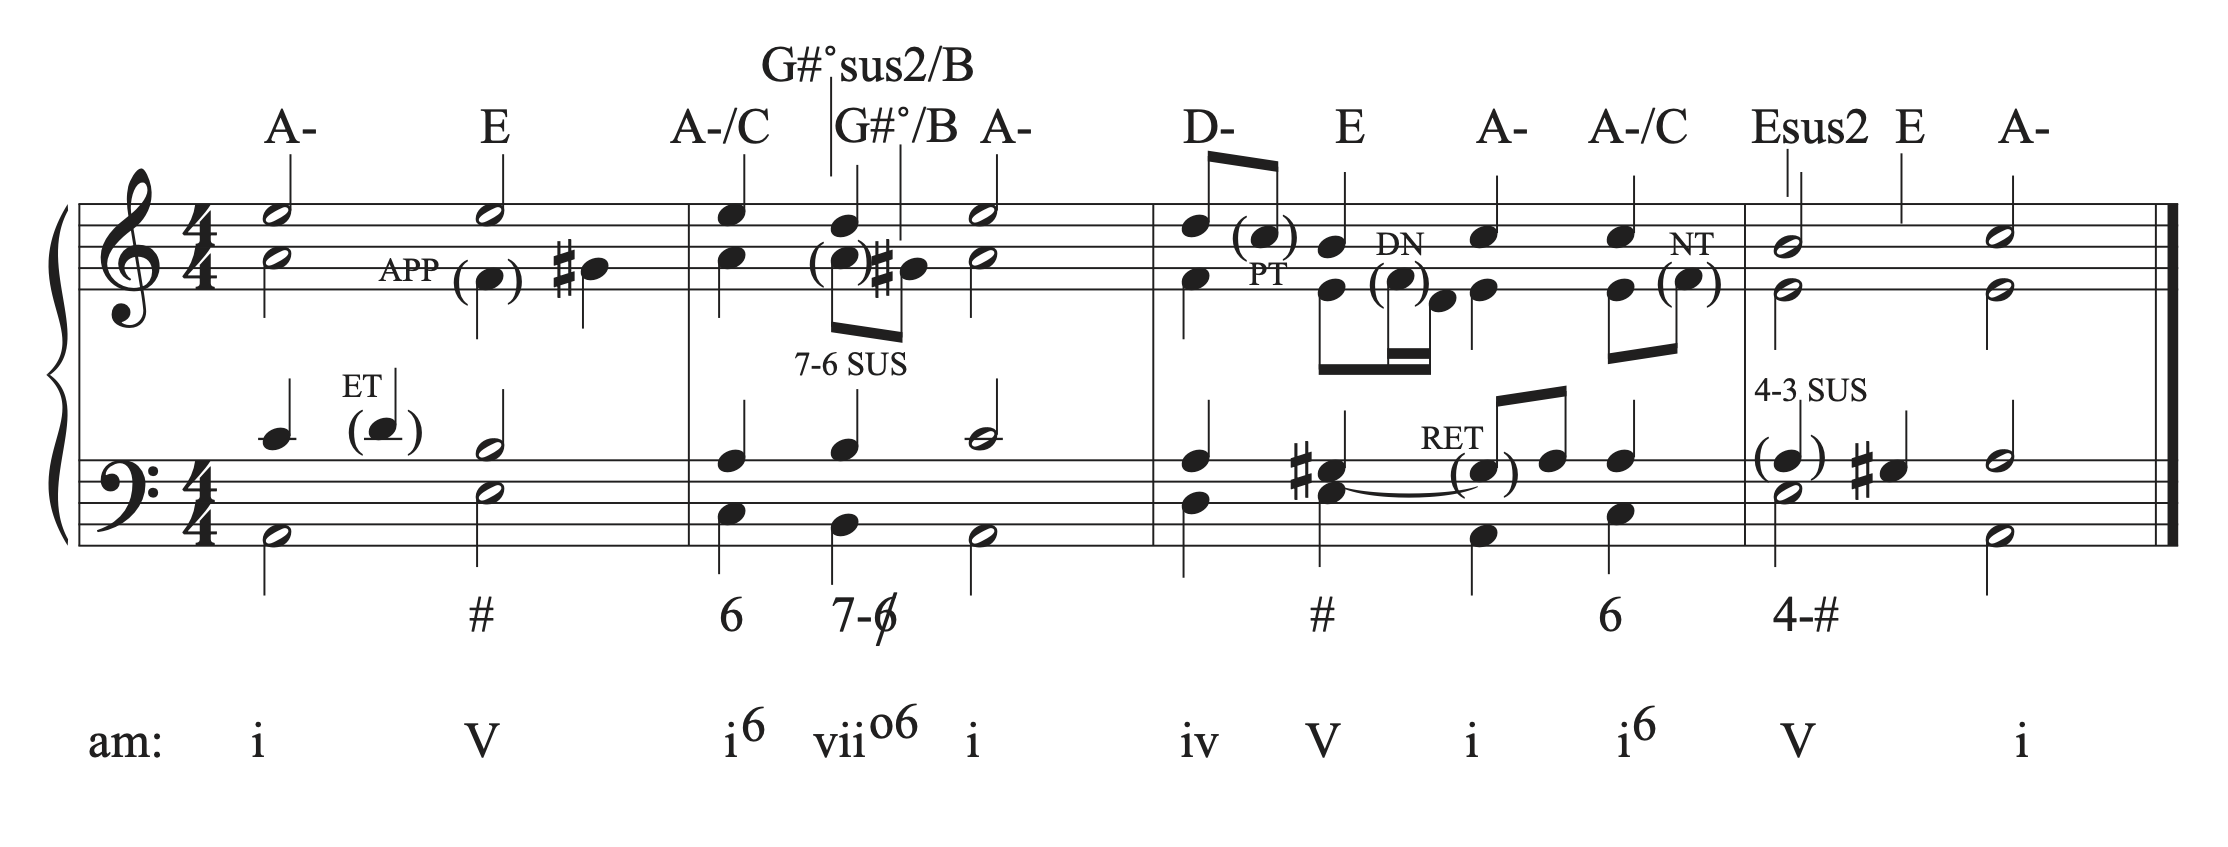 The musical examples in A minor with an escape tone added.